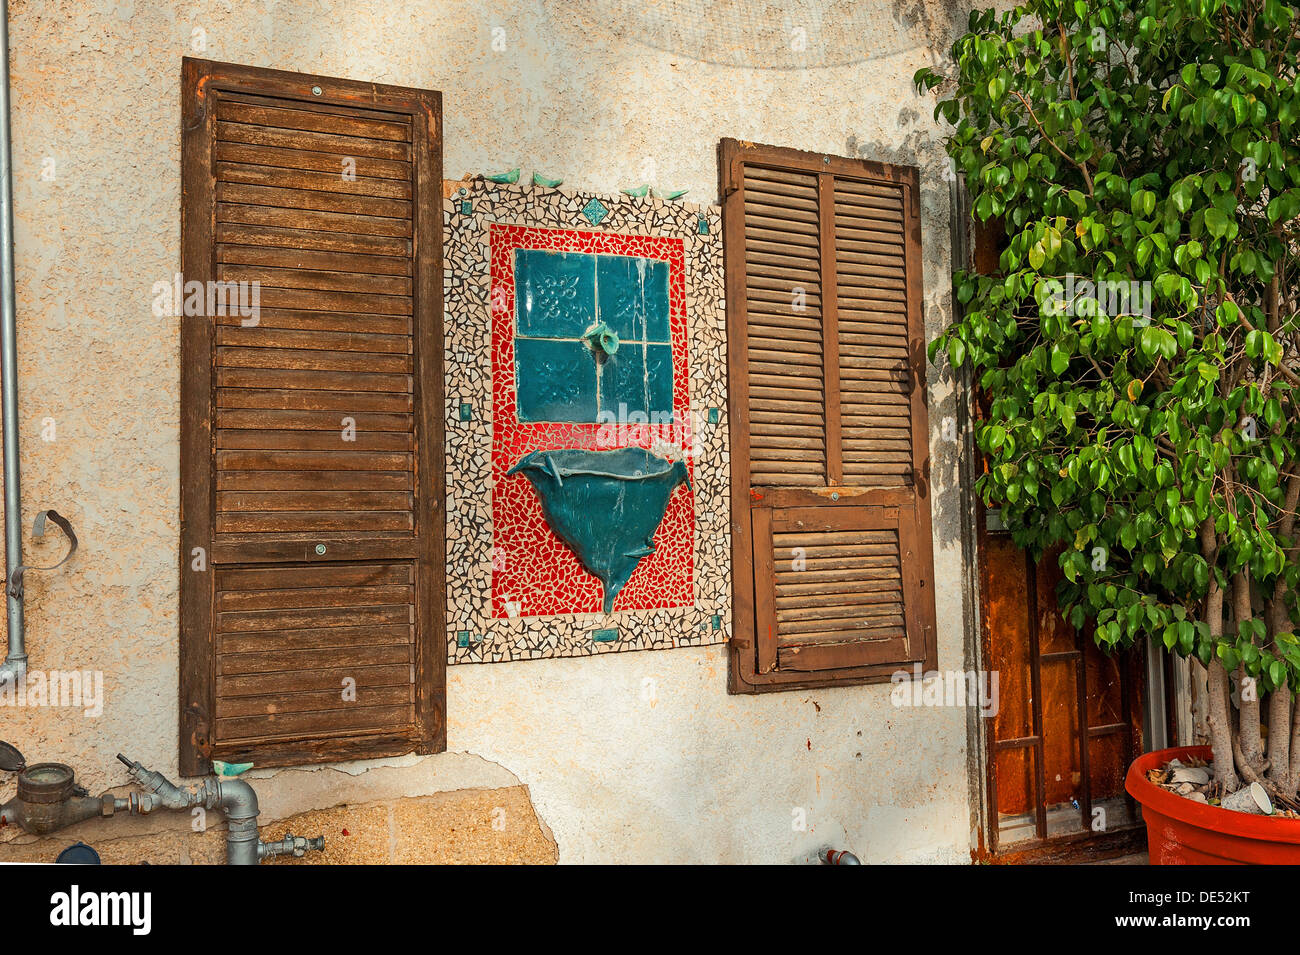 A building wall with mosaics, water fountain fake shutters and pipes in Mazkeret Batya Israel Stock Photo